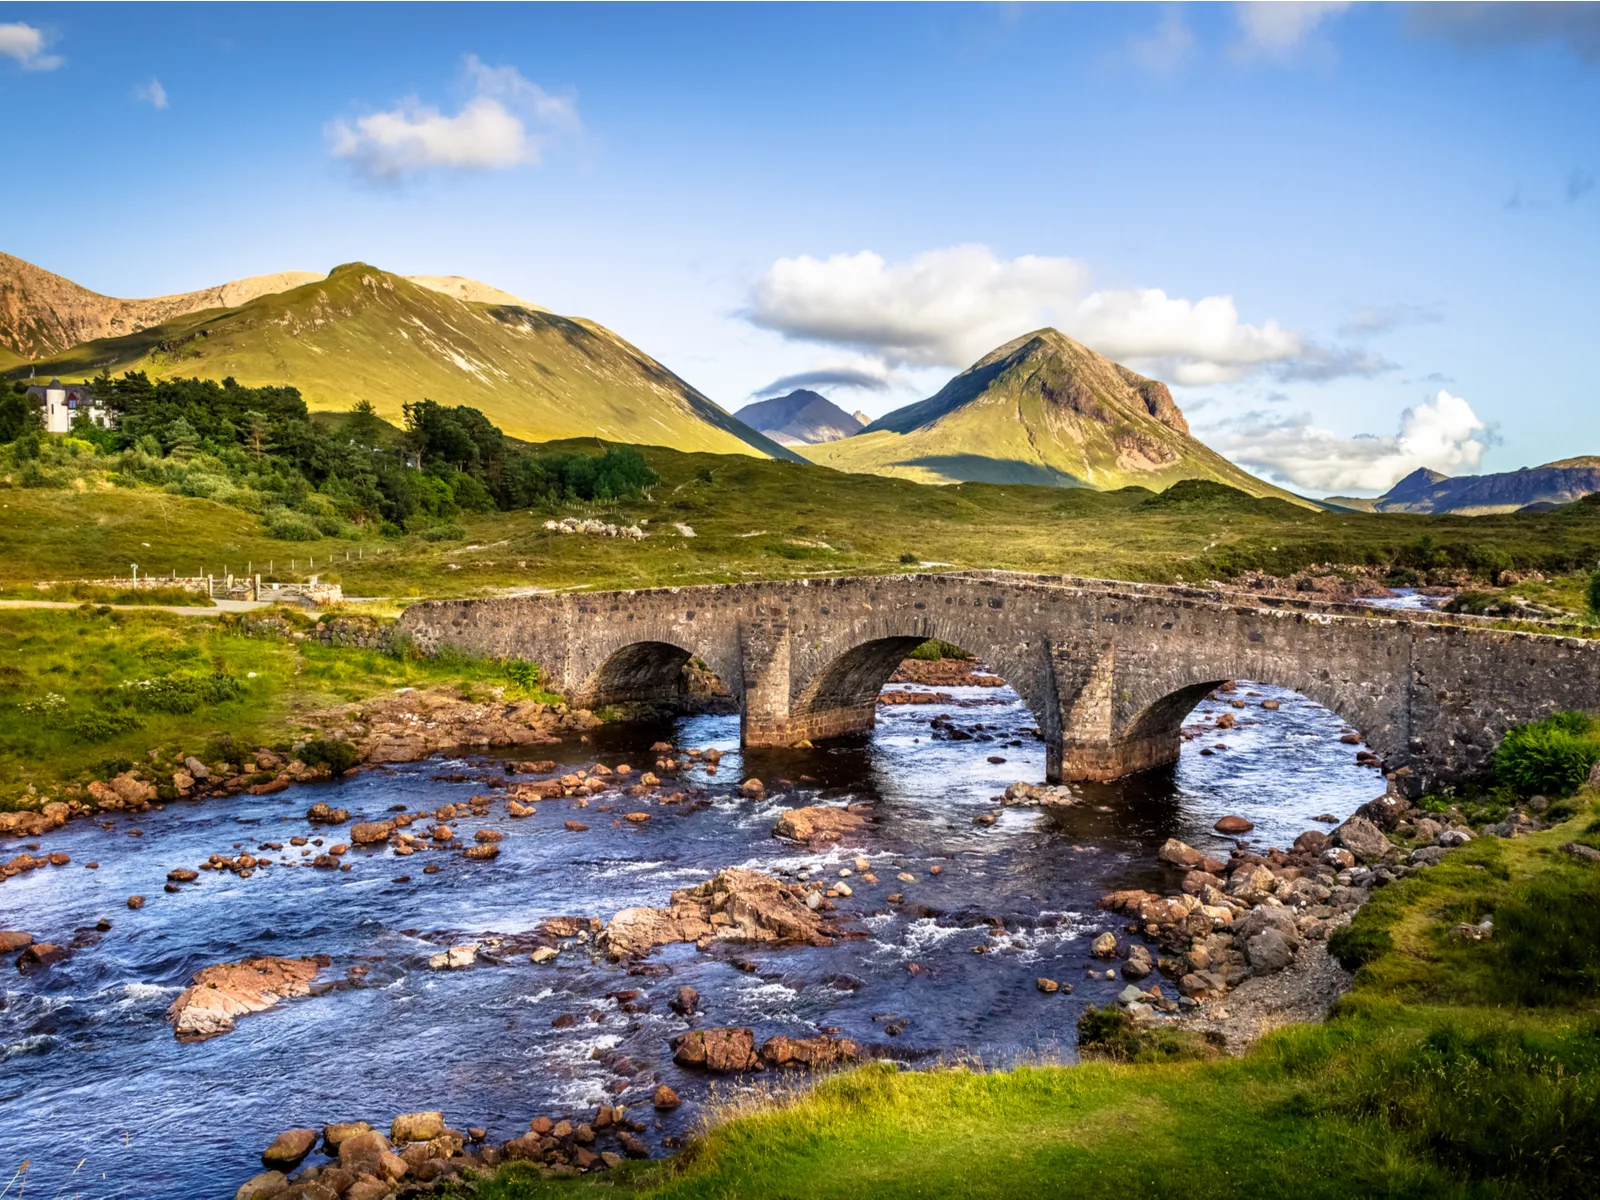 For a piece on the best time to visit Scotland, pictured is an old brick bridge across the river in Sligachan